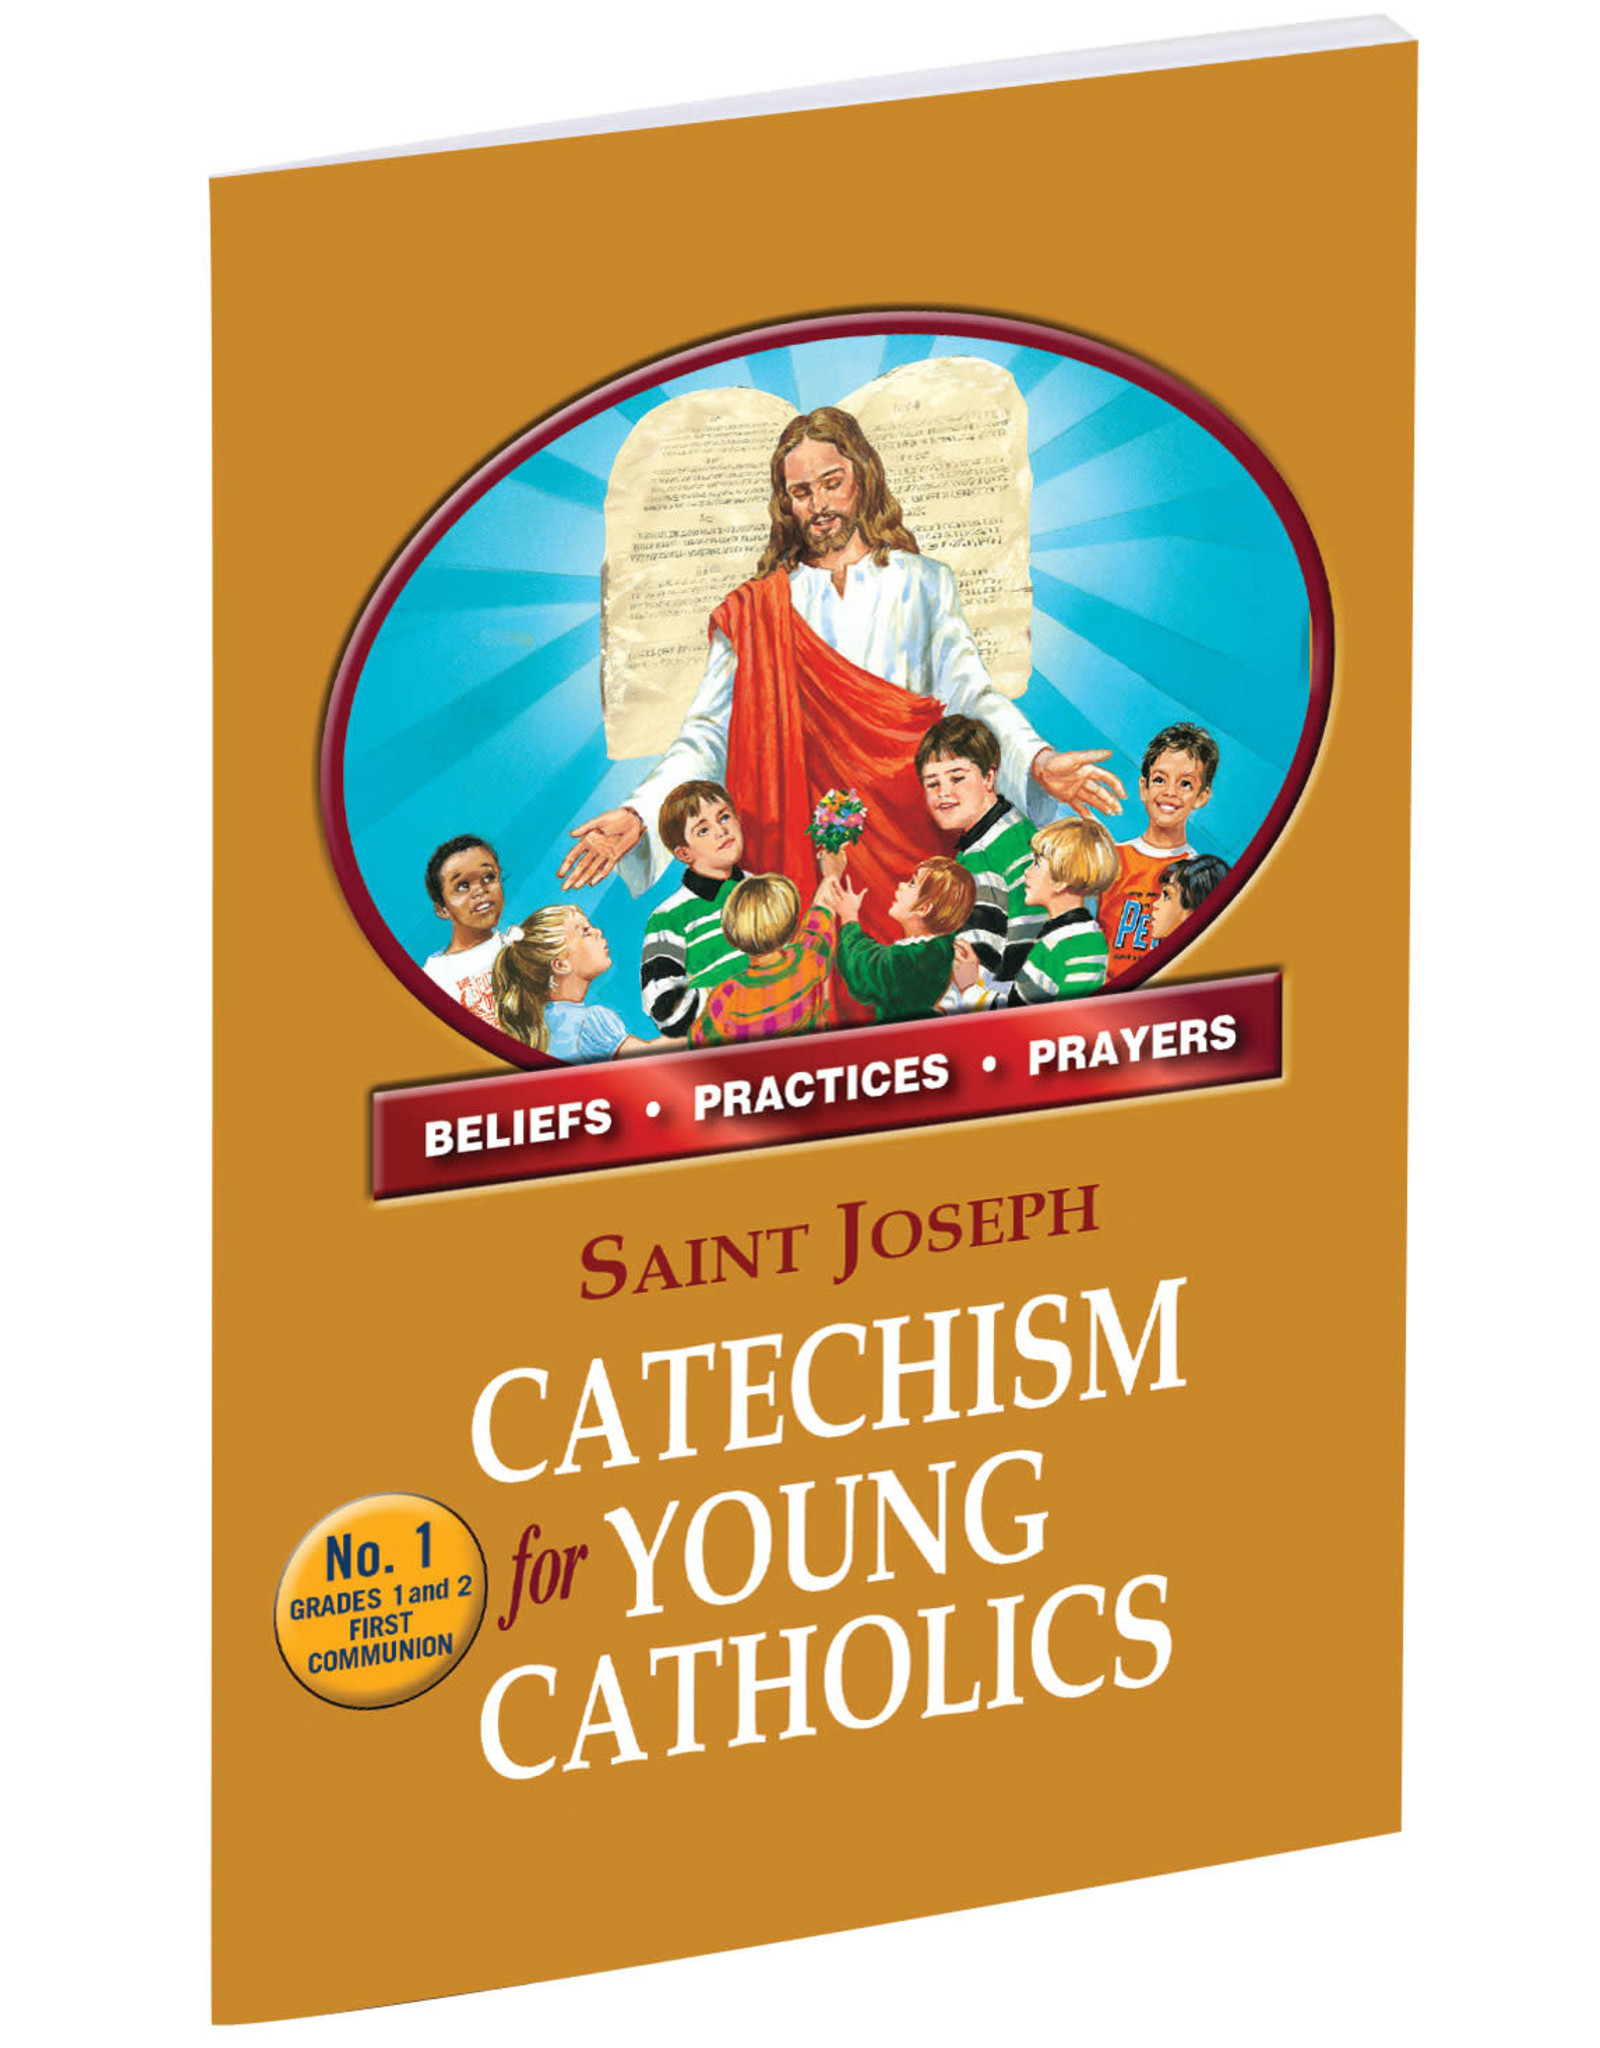 Catholic Book Publishing St. Joseph Catechism for Young Catholics No. 1 (Grades 1 & 2 - First Communion)